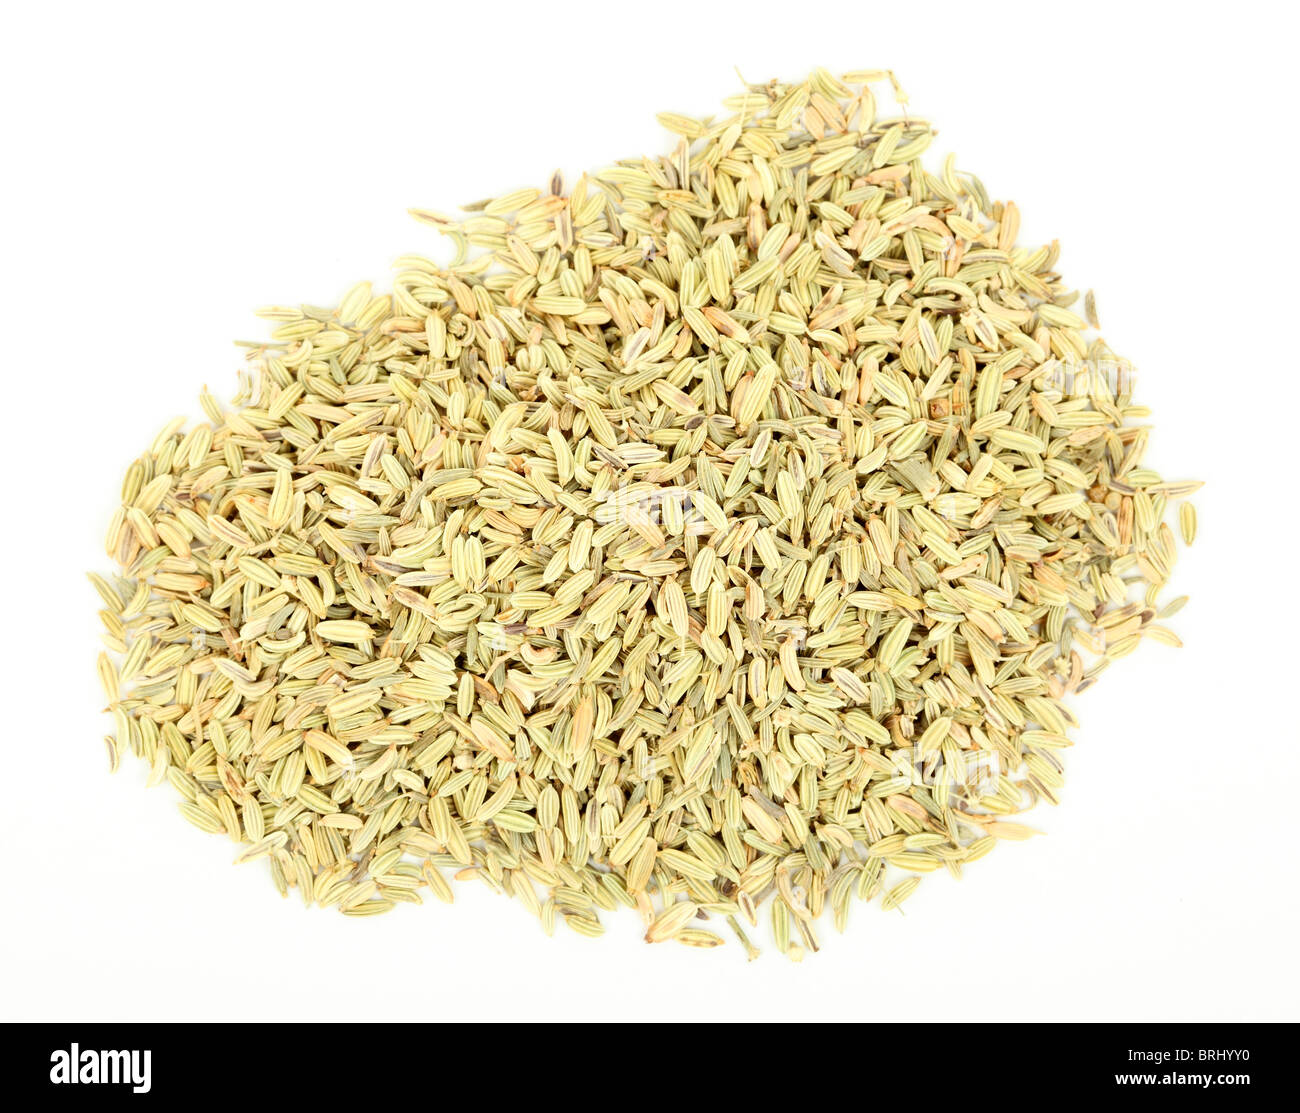 Fennel seeds over white background Stock Photo